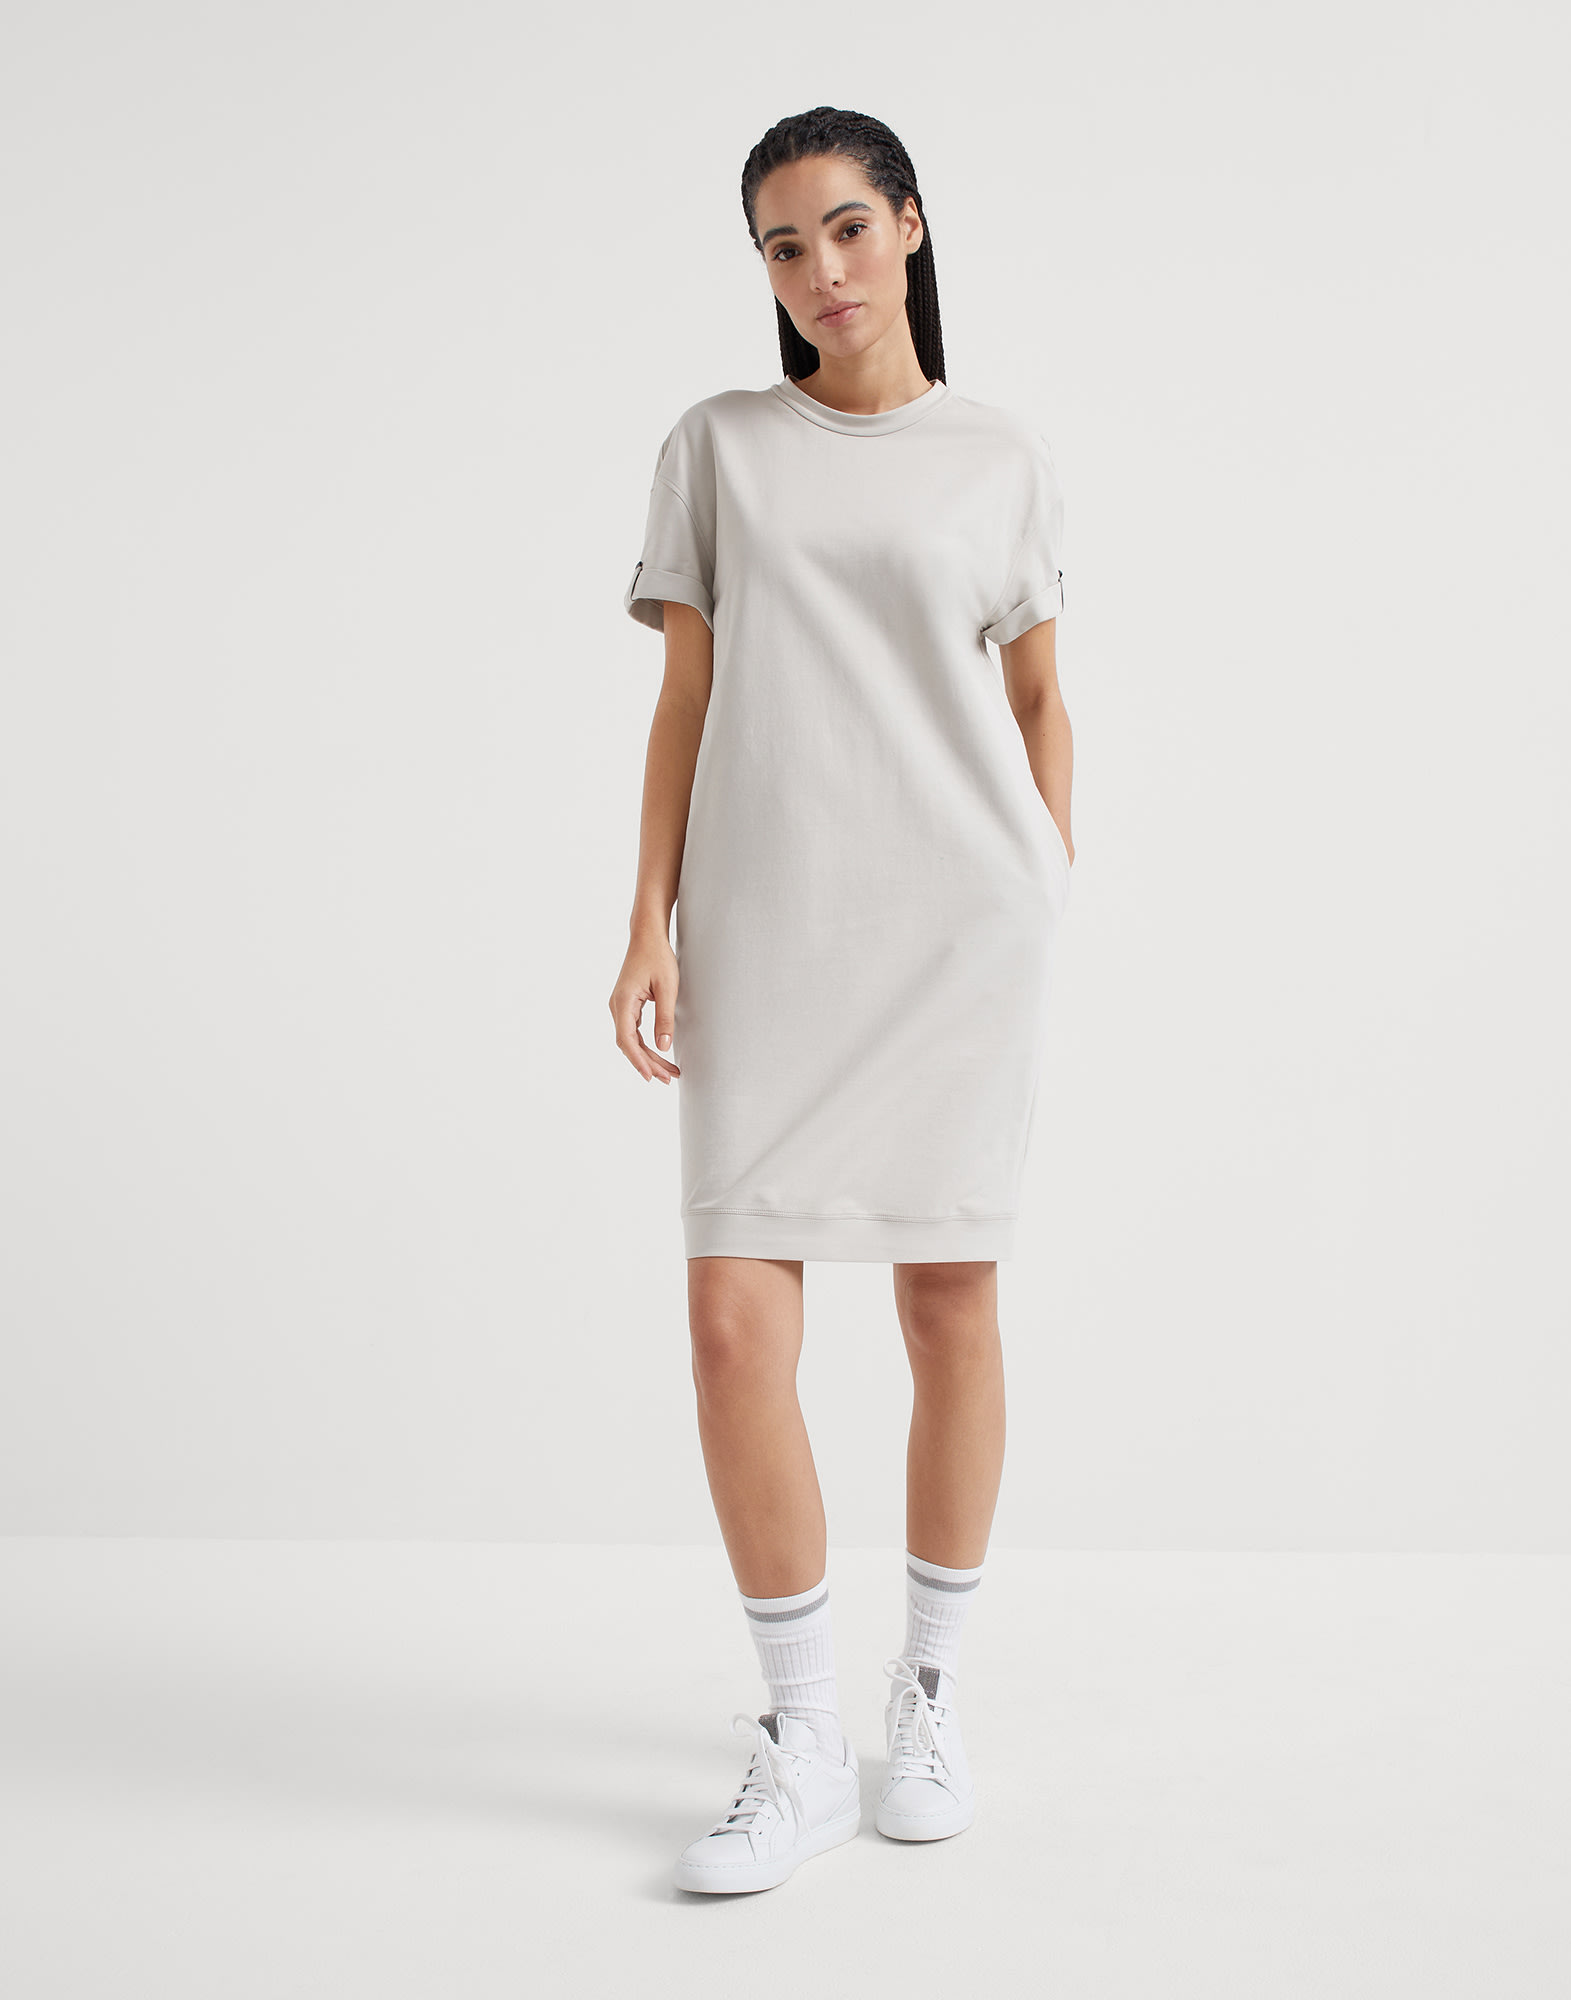 French terry dress